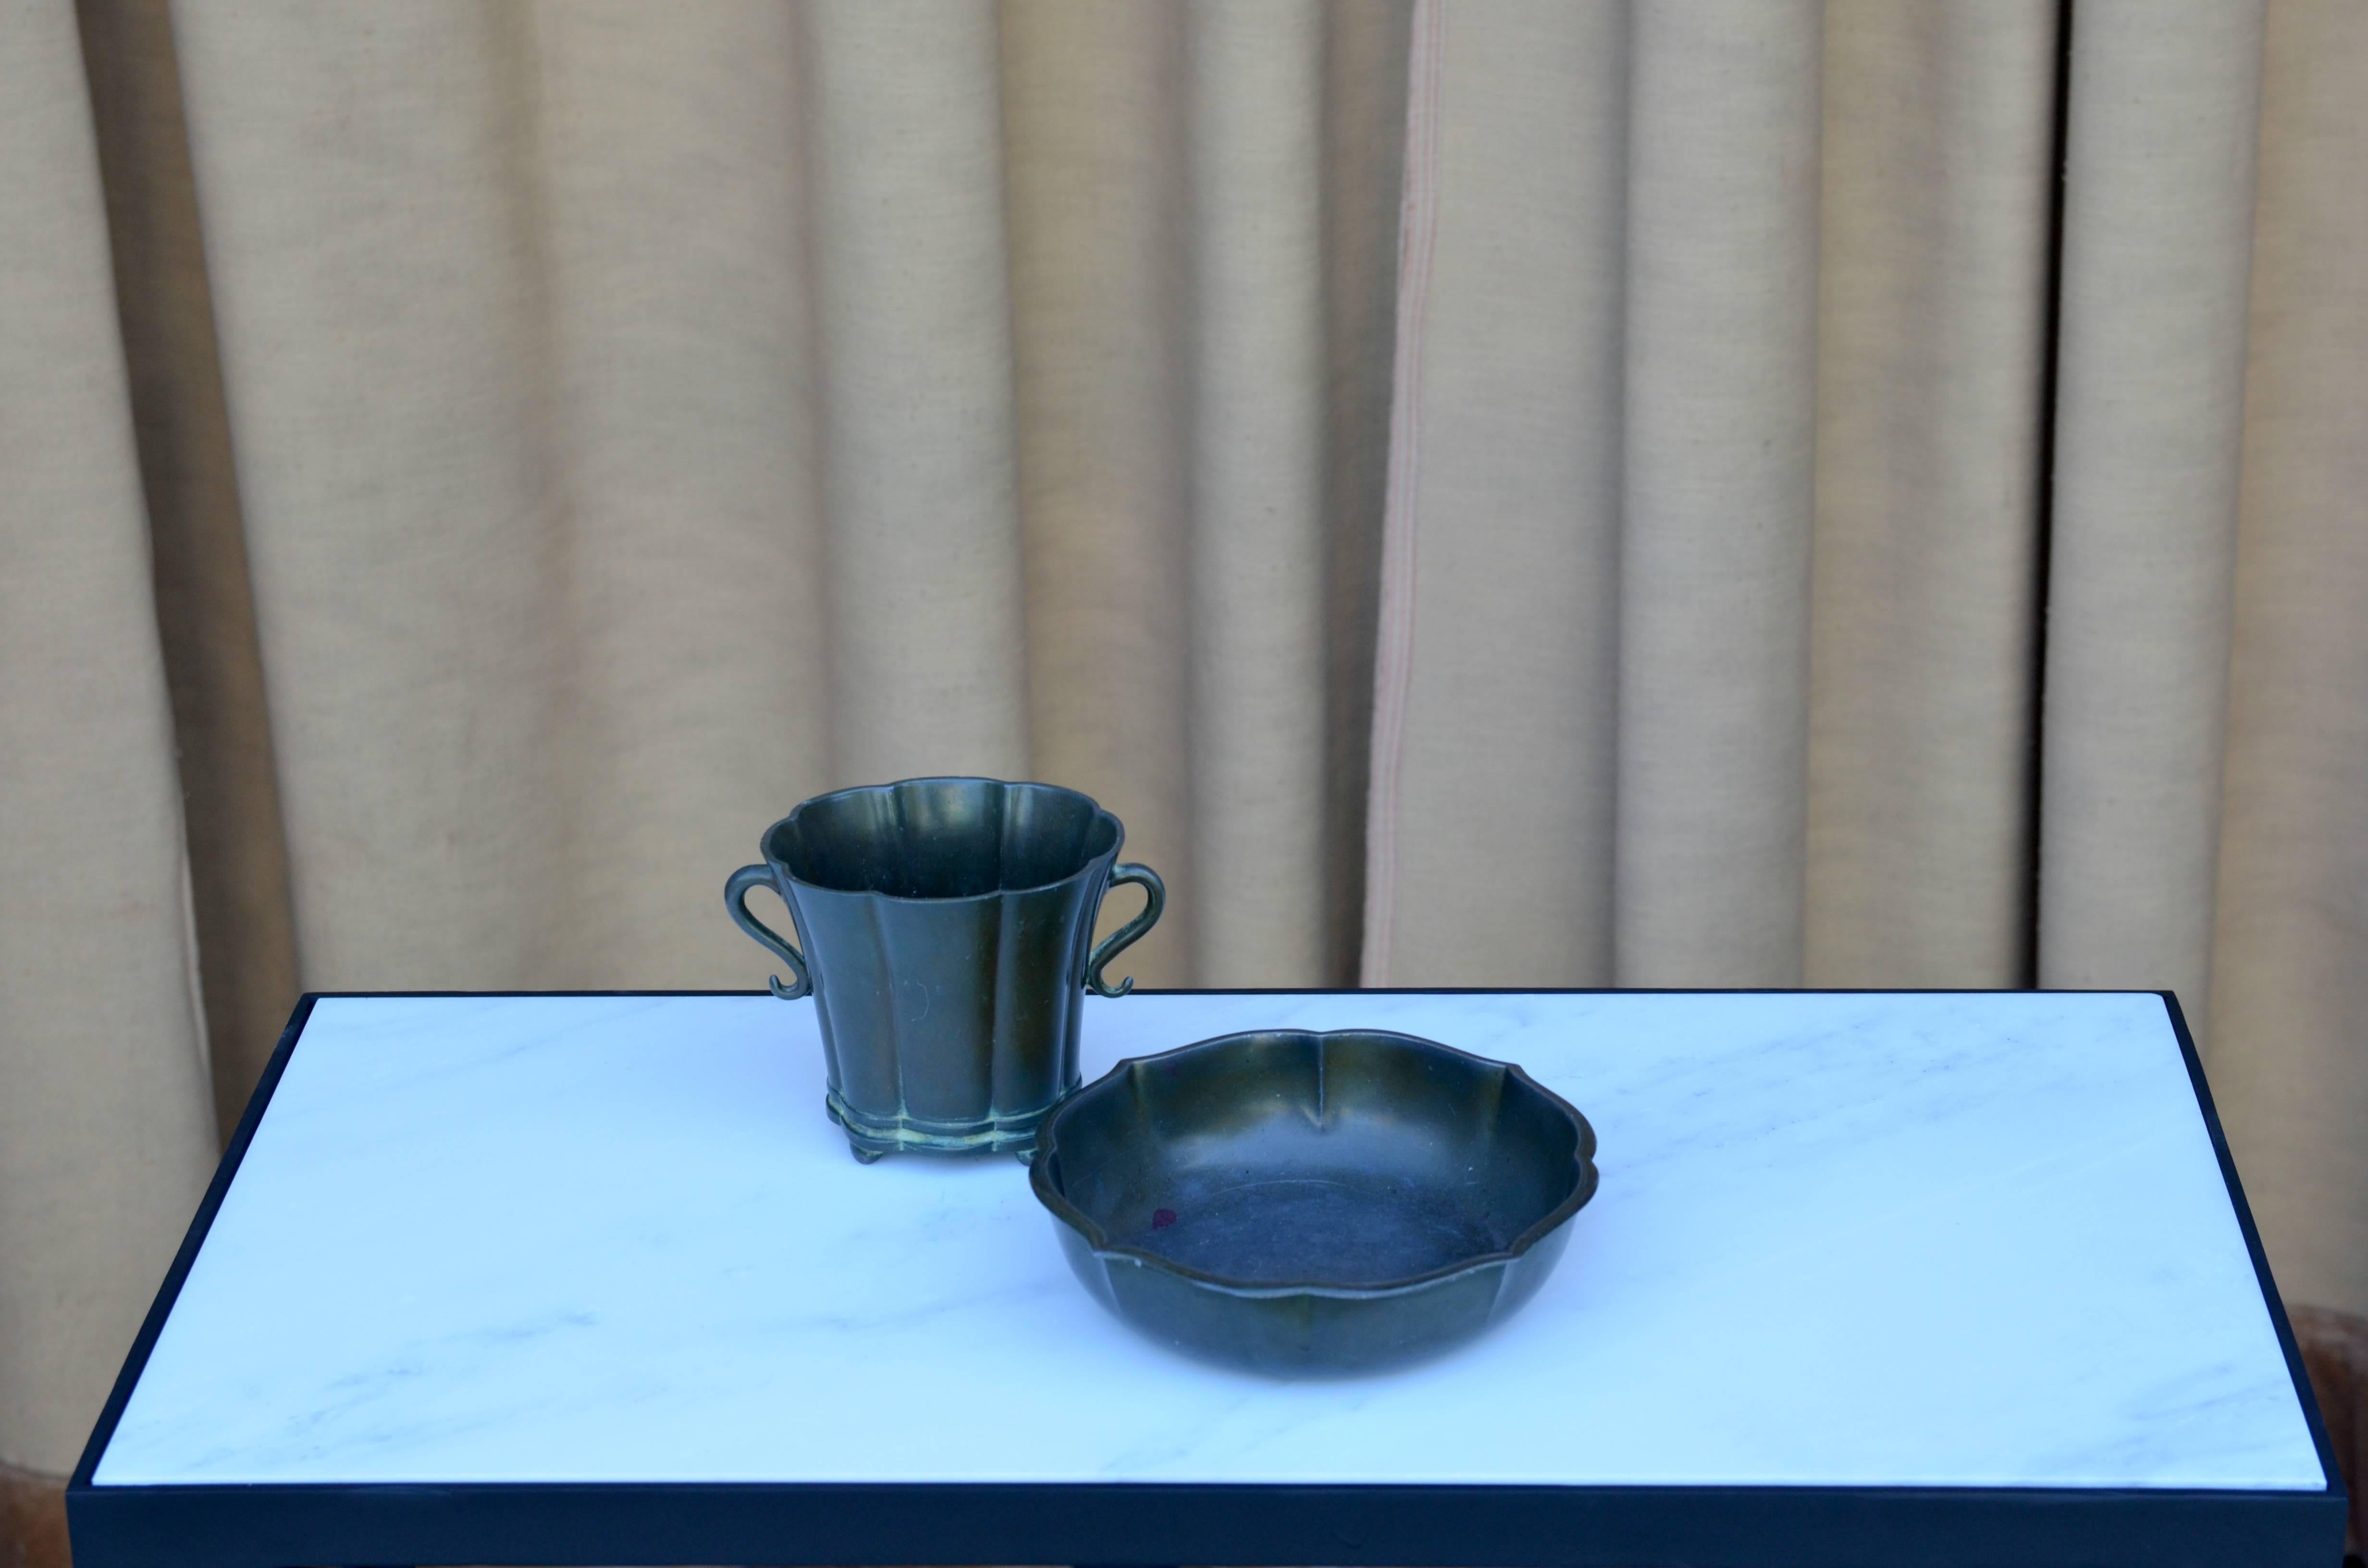 Set of Two Scalloped Disko Metal Bowls by Just Andersen. Stamped.

Vase is 7 in. dia x 2 in. tall;
Bowl is 6 in. wide x 3.5 in. deep x 4 in. tall.

IB Just Andersen was born on July 13th 1884 in Godhavn, Greenland. His first apprenticeship was